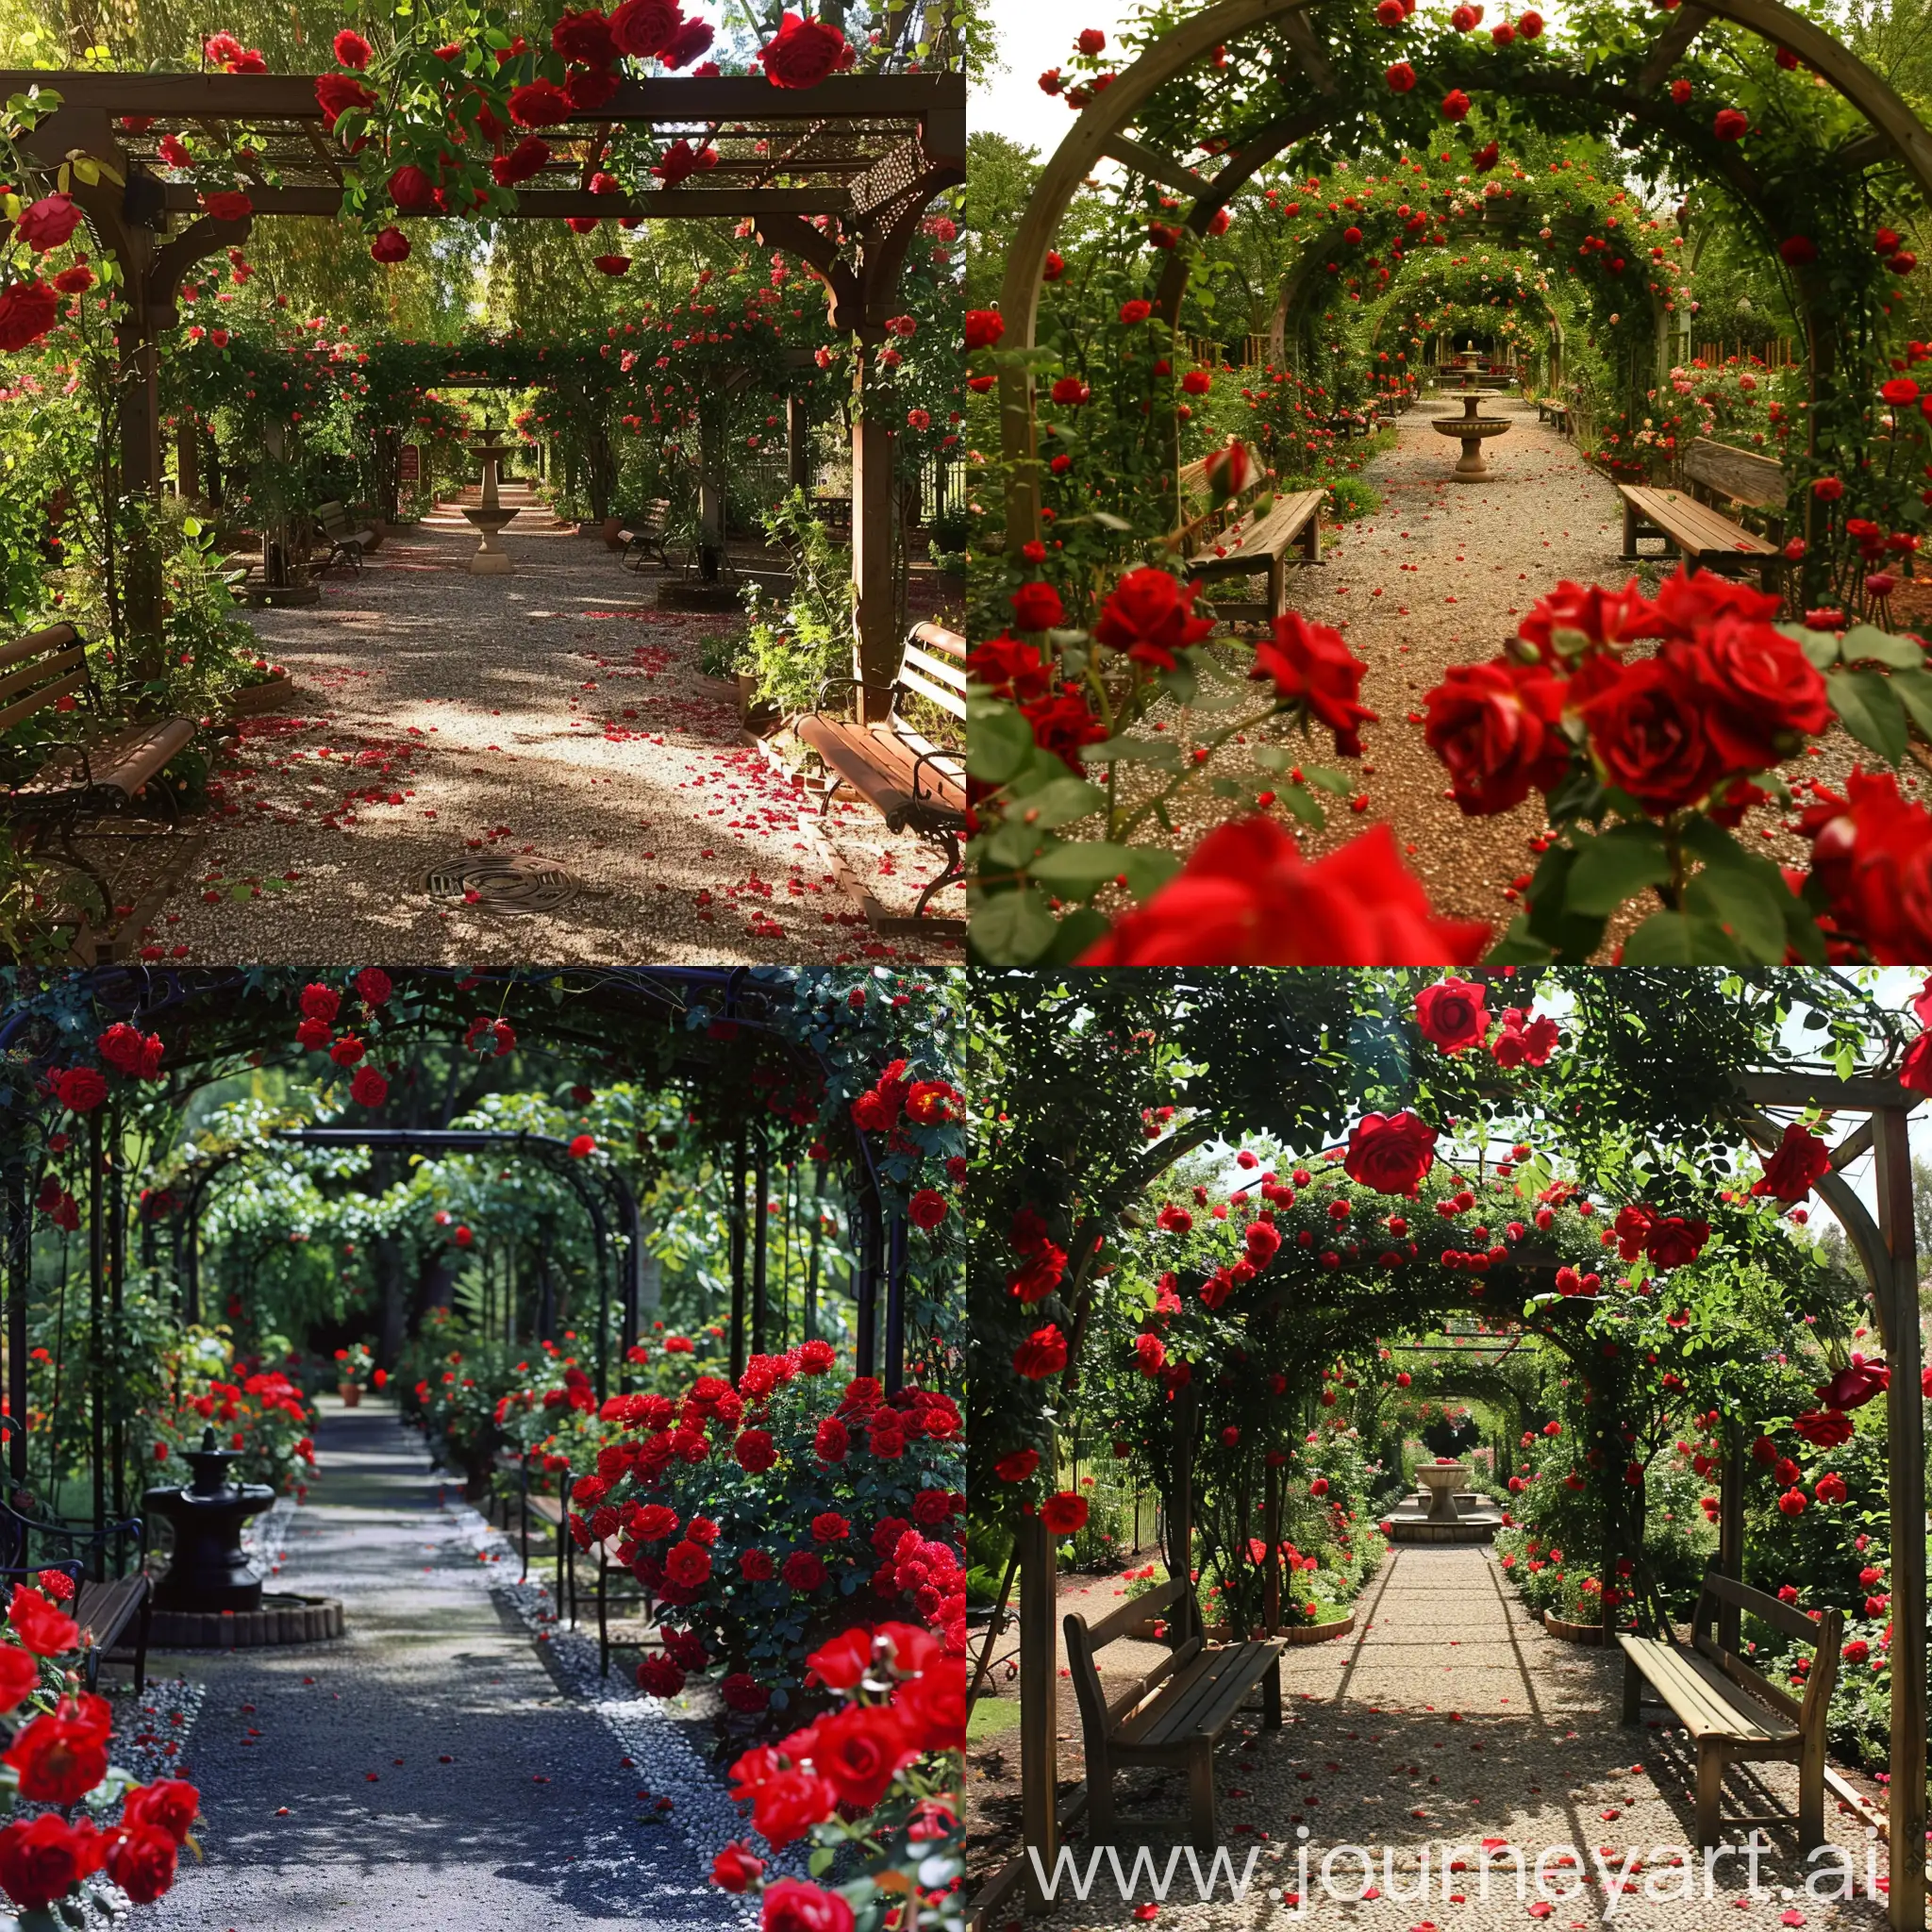 rose garden, lush, manicured, with arbors and arches and a path of tiny pebbles red roses,cozy nook withhfountain and benches